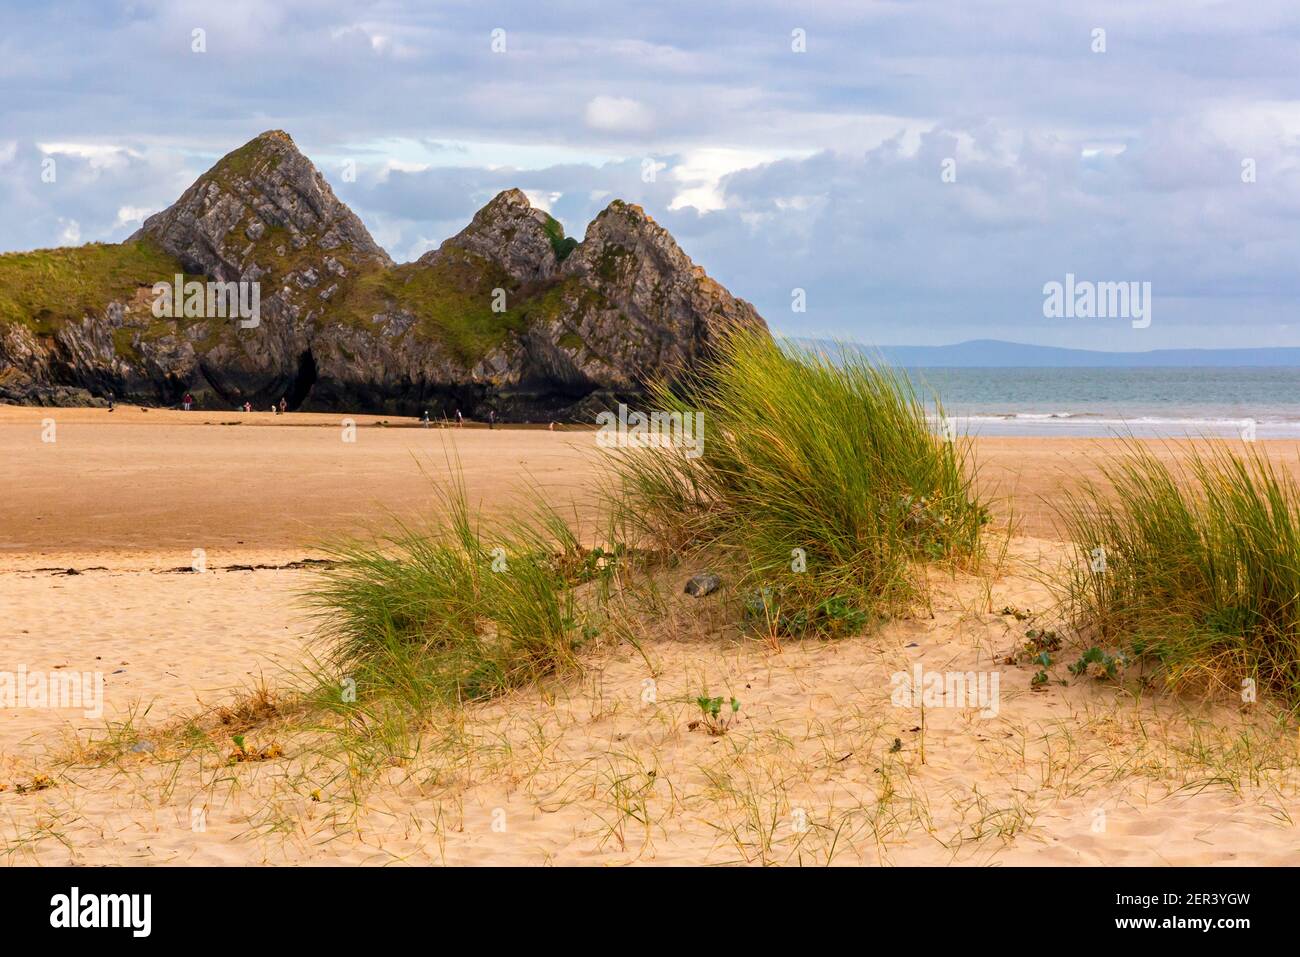 View of the sandy beach and dunes at Three Cliffs Bay on the south coast of the Gower Peninsula near Swansea in South Wales UK Stock Photo